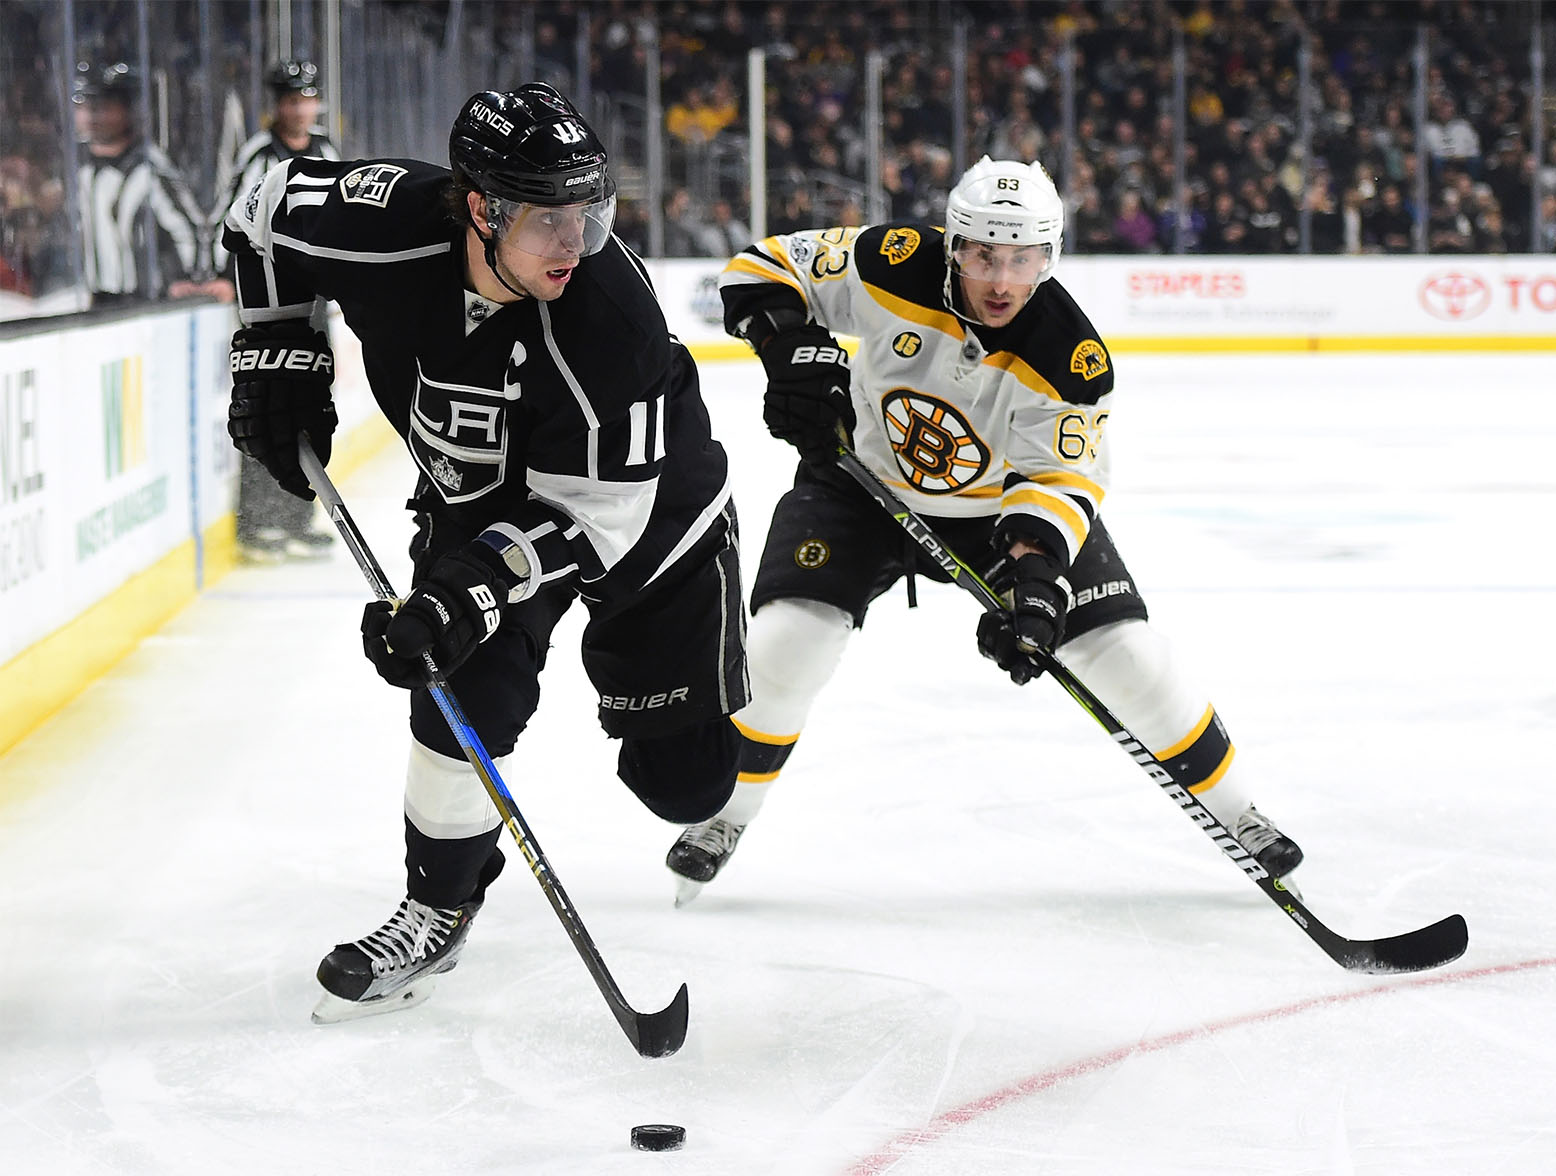 LOS ANGELES, CA - FEBRUARY 23: Anze Kopitar #11 of the Los Angeles Kings keeps the puck from Brad Marchand #63 of the Boston Bruins while on the powerplay during the second period at Staples Center on February 23, 2017 in Los Angeles, California. (Photo by Harry How/Getty Images)